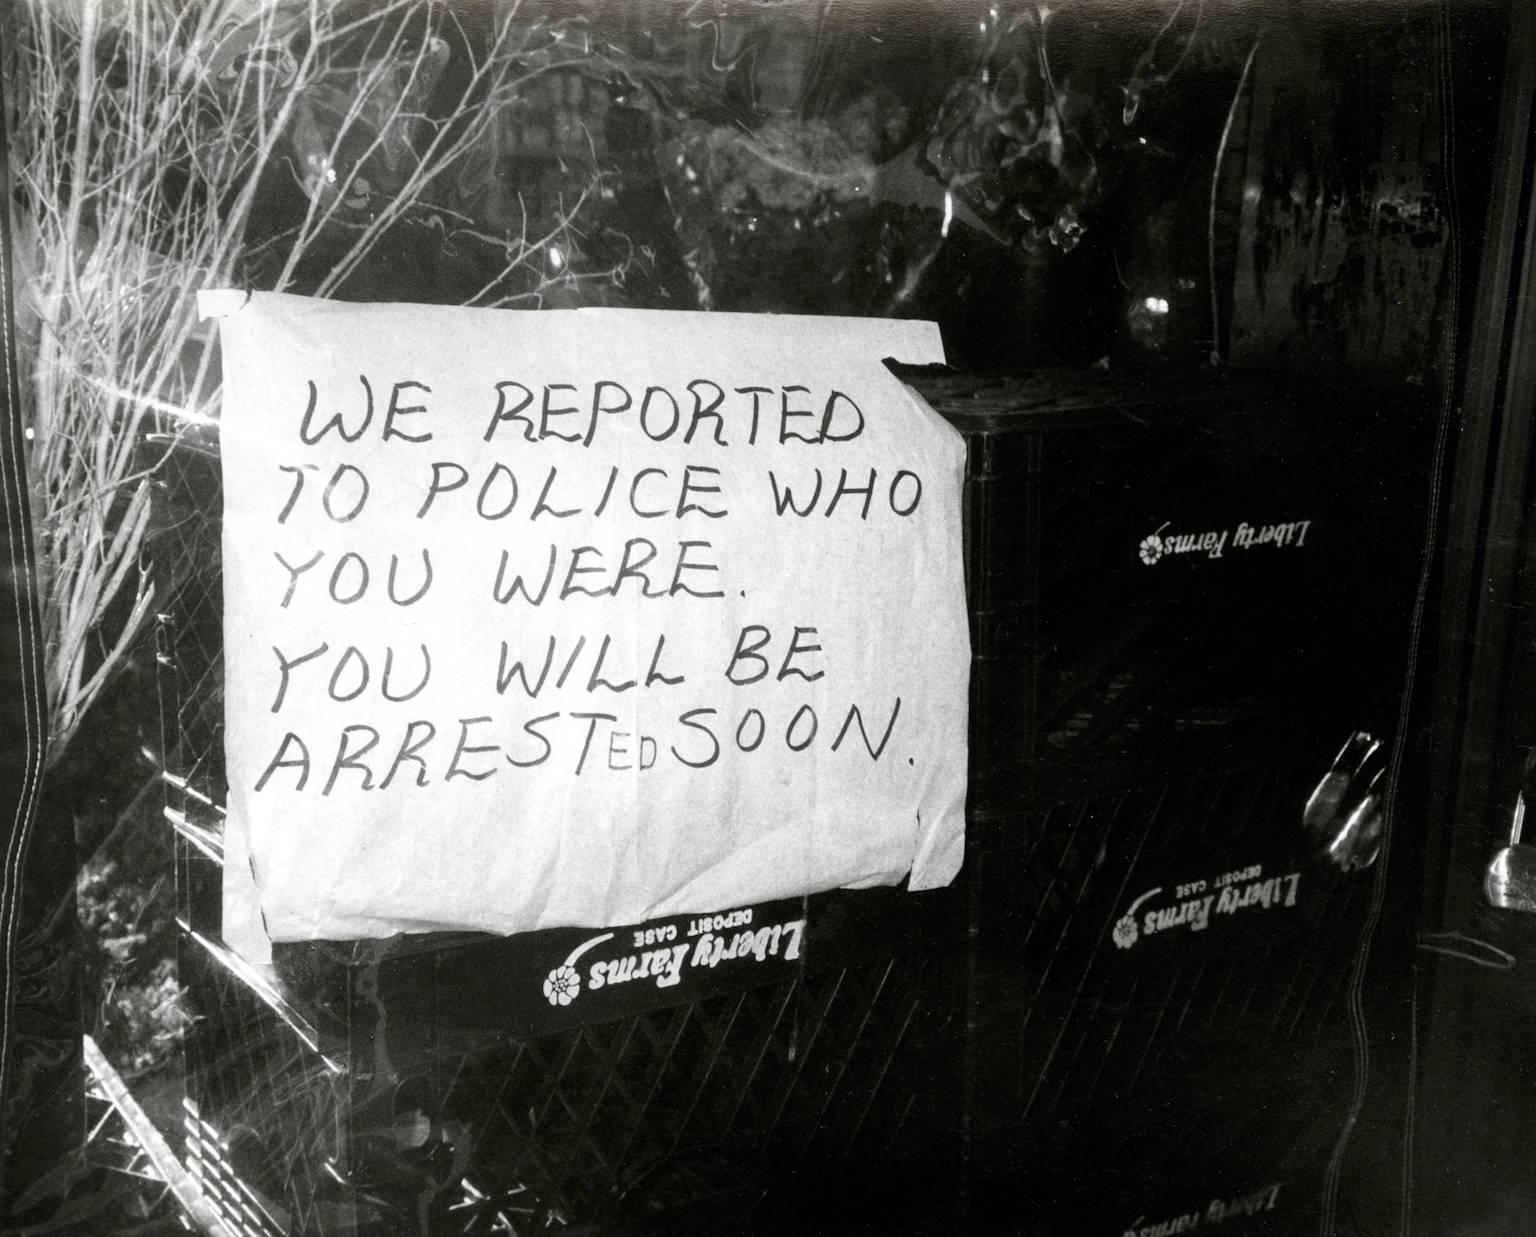 Andy Warhol Black and White Photograph - Photograph of a Sign (We Reported You to the Police...)